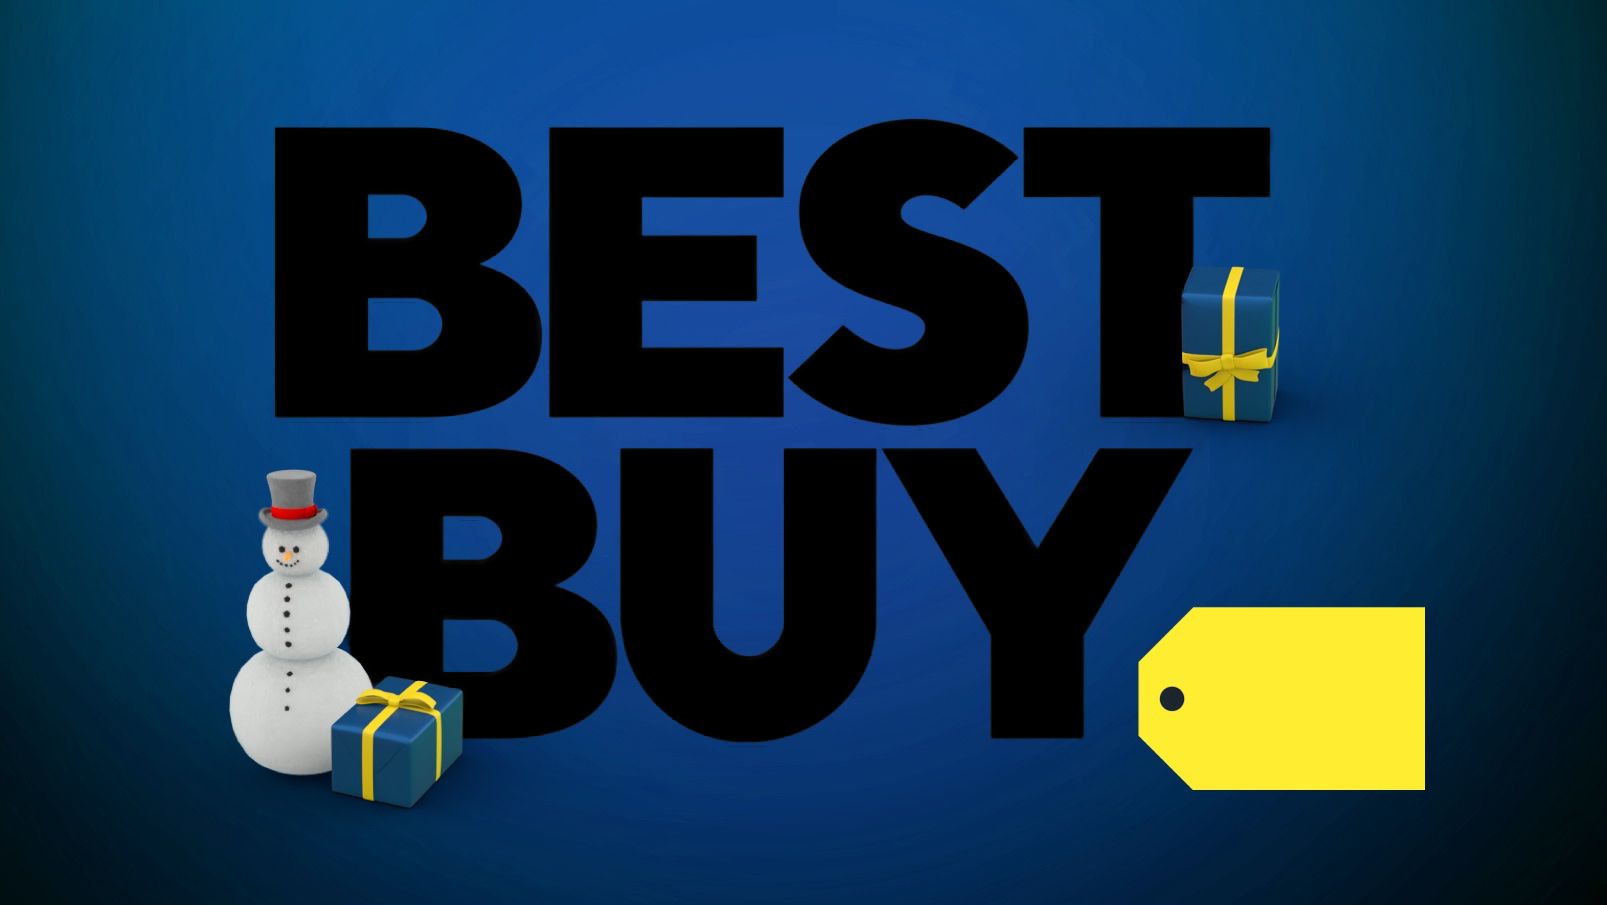 Best Buy Holiday Sales Continue With Special Prices for My Best Buy Members - macrumors.com